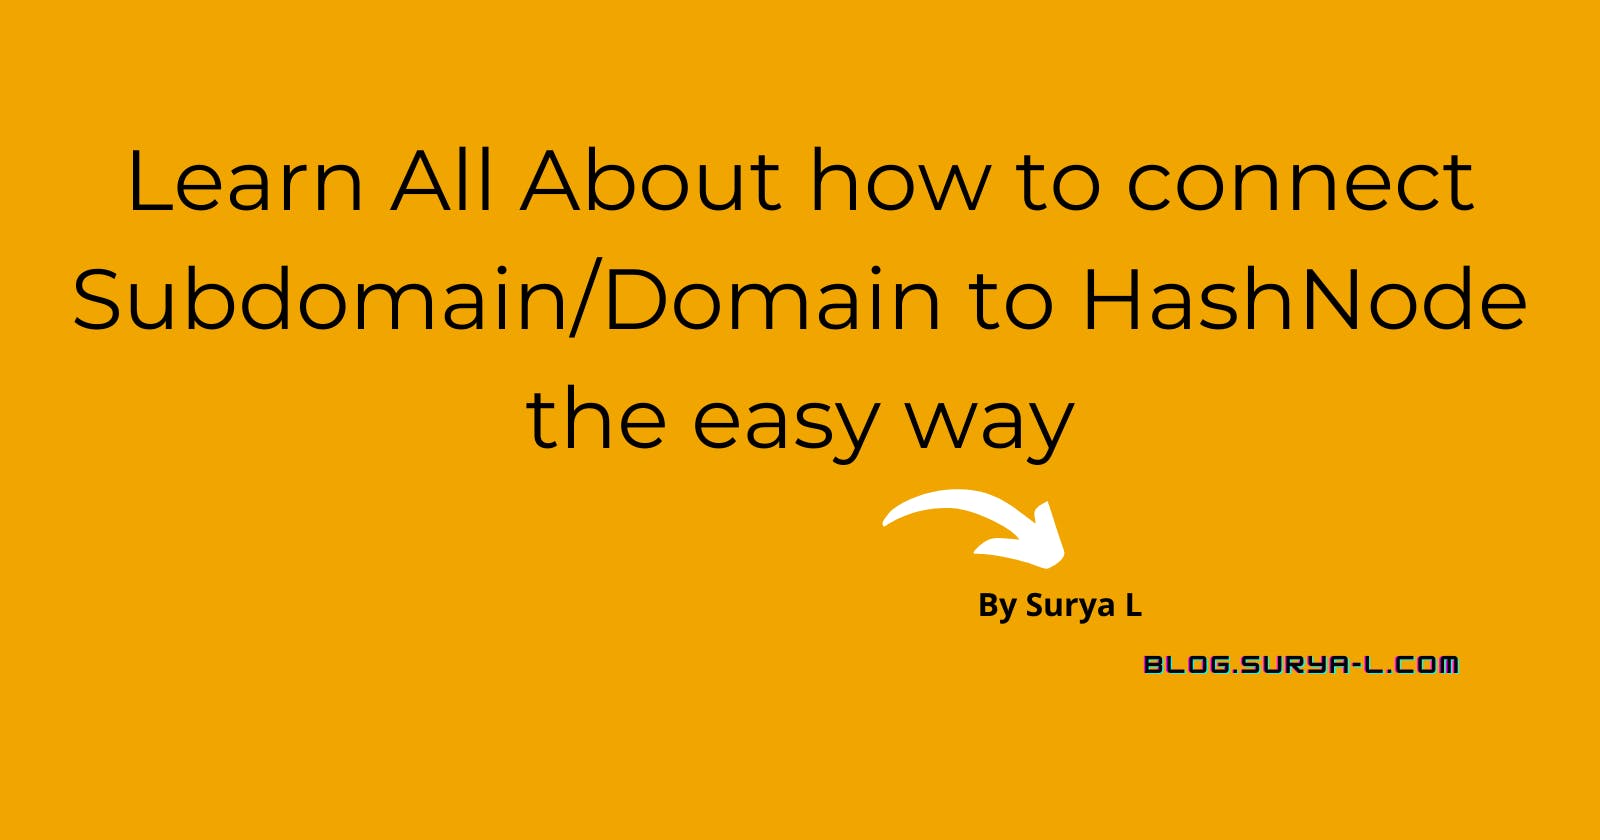 How to connect your custom sub domain/Domain to Hashnode
Ex: blog.yourdomain.com/www.yourdomain.com